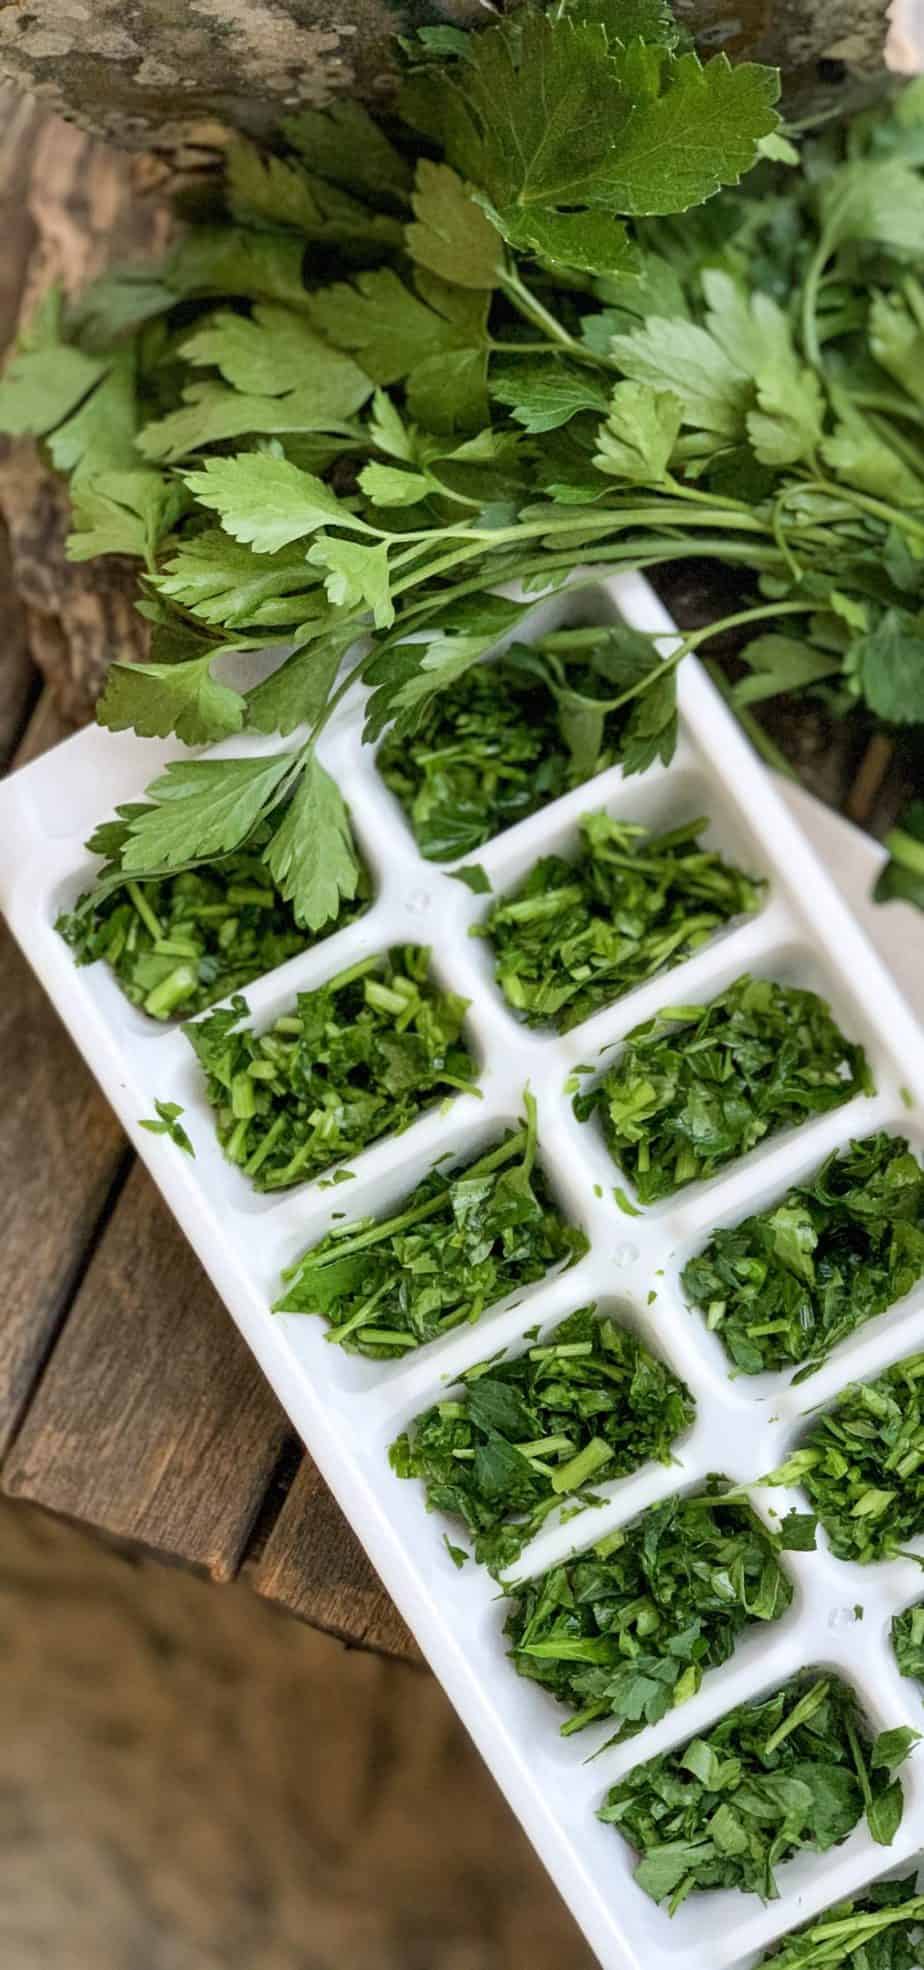 parsley punch shown next to herbs in a ice cube tray.